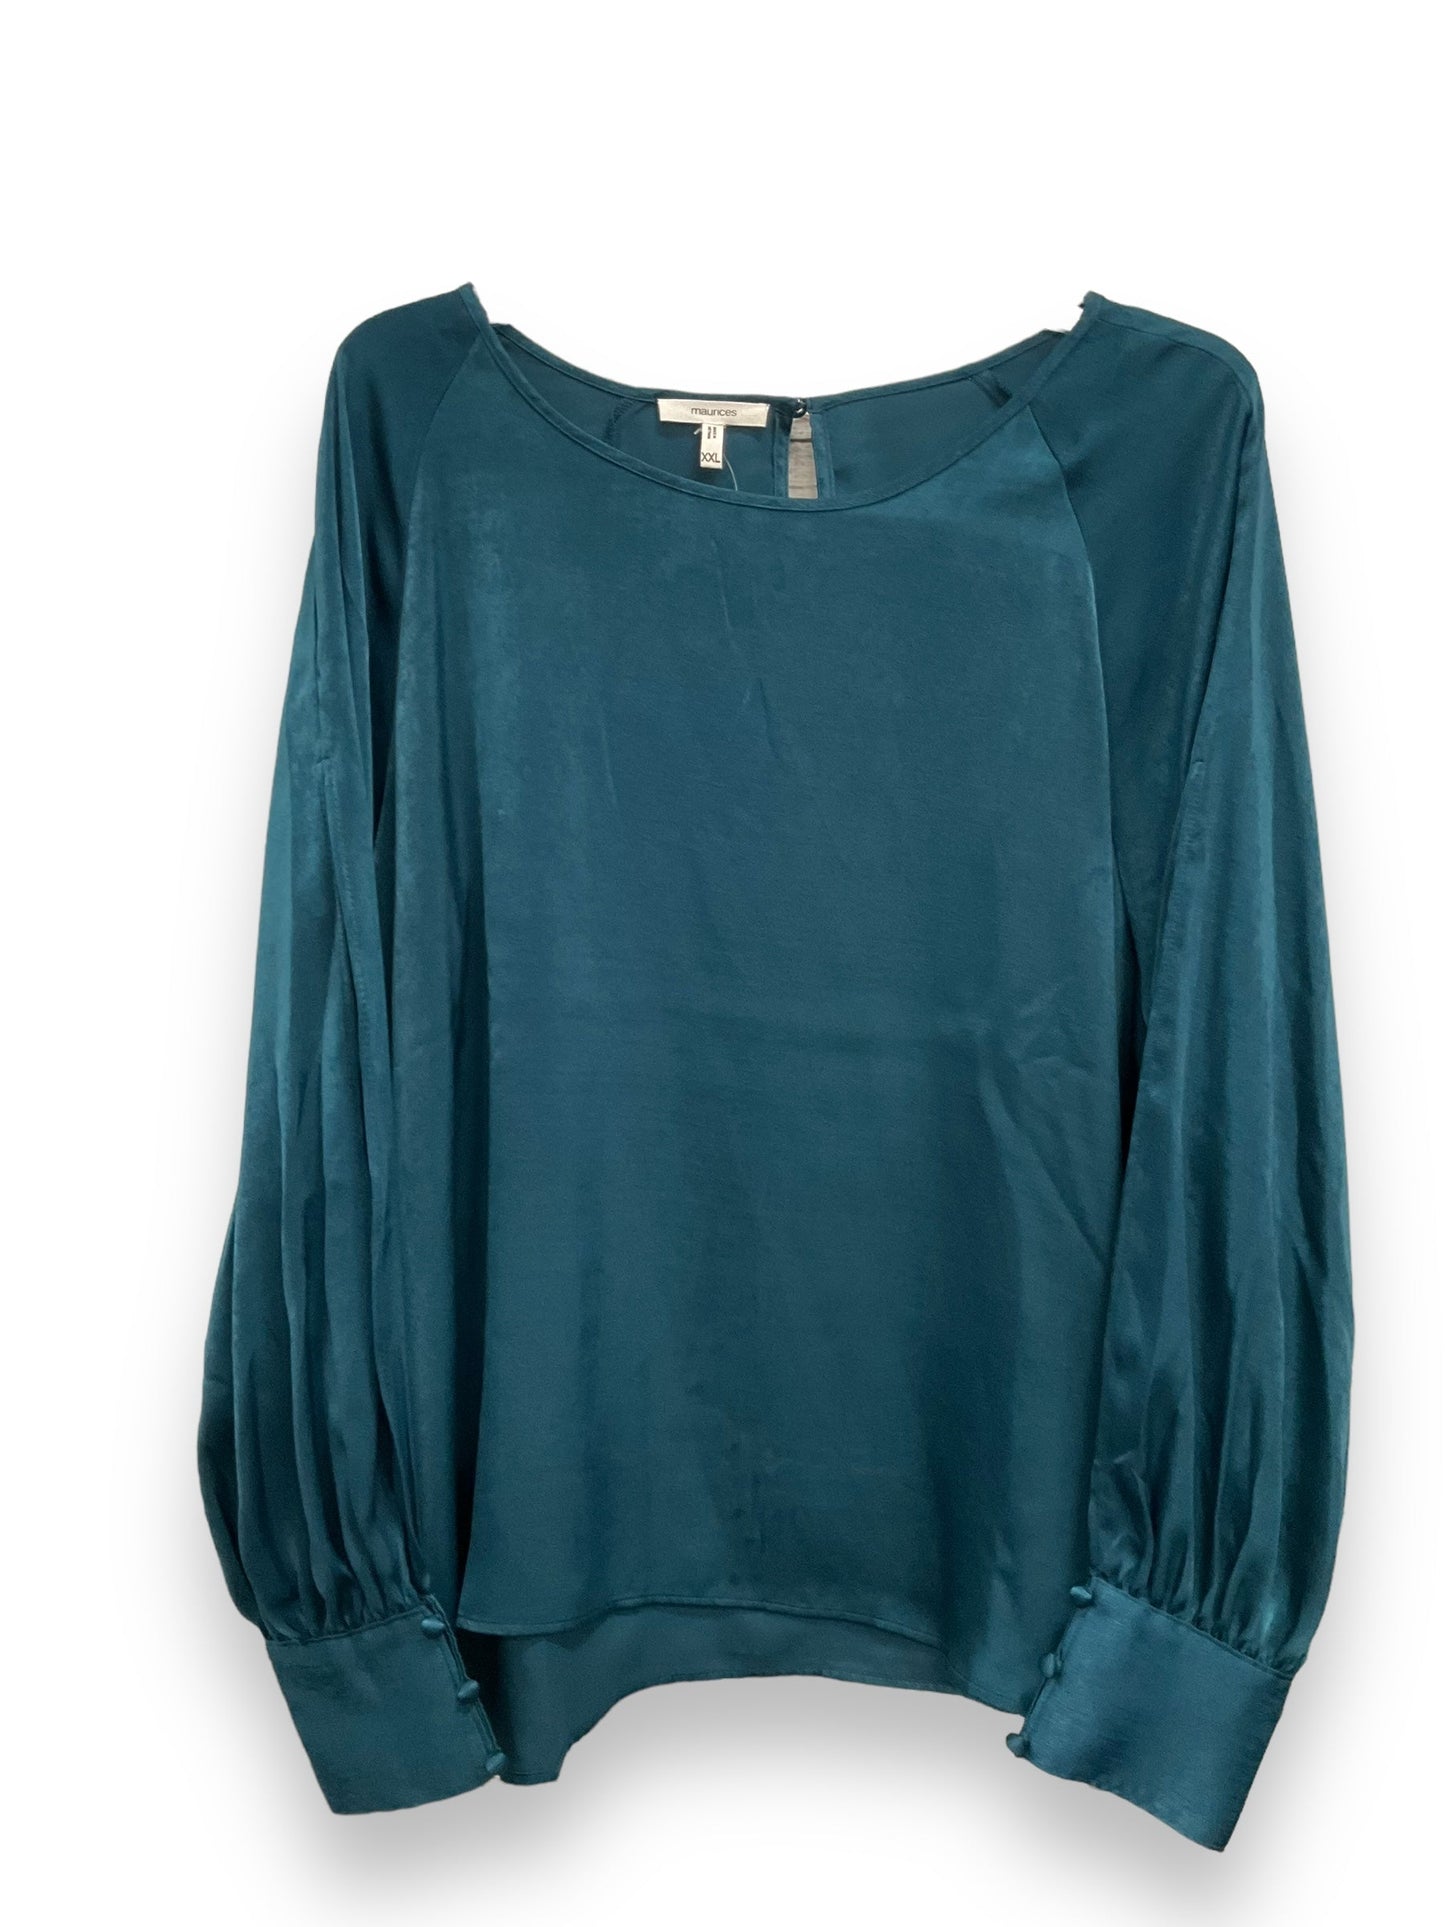 Teal Blouse Long Sleeve Maurices, Size Xxl